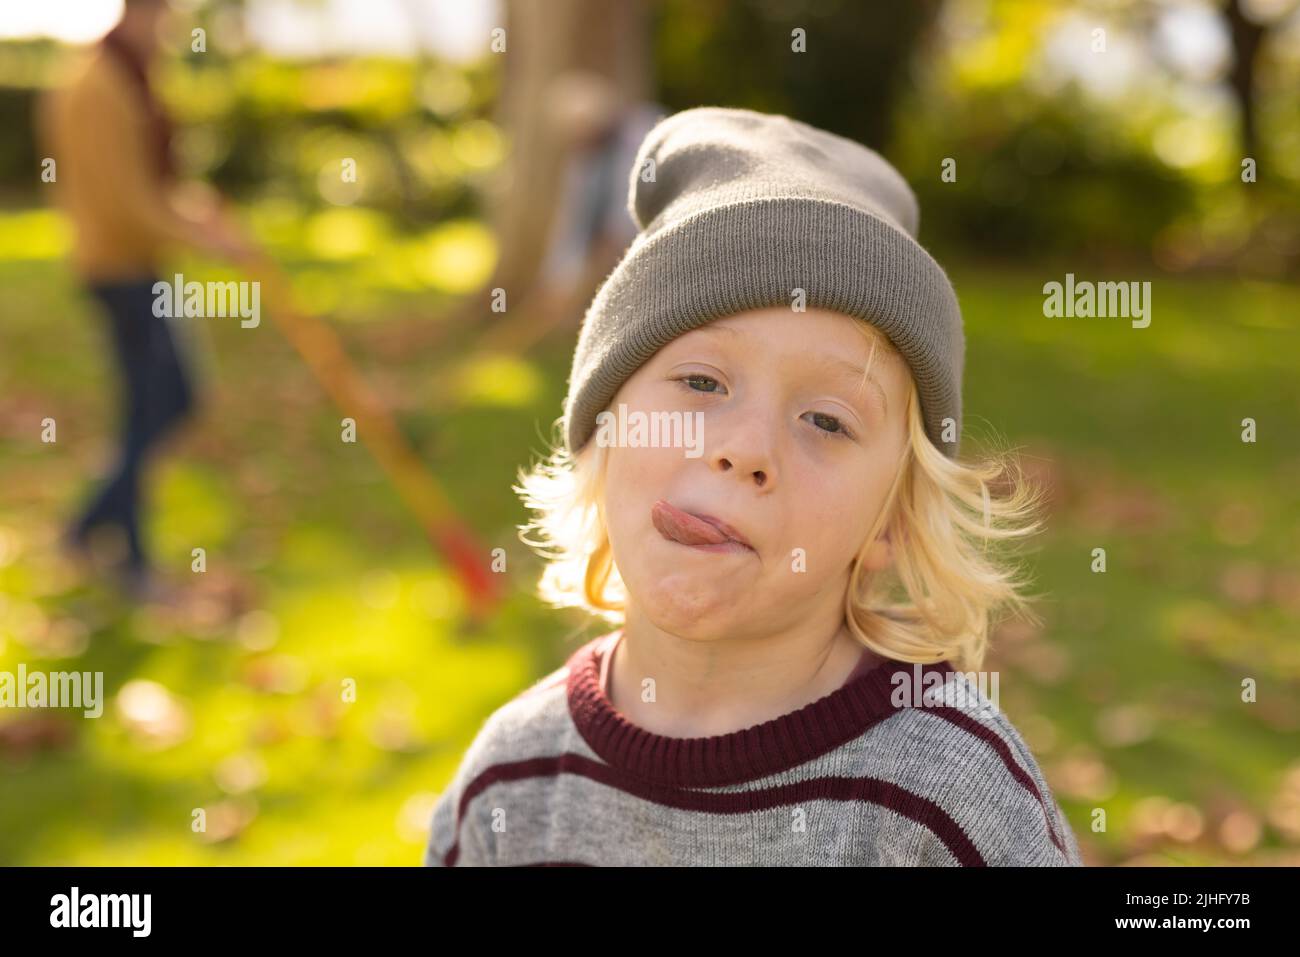 Image of happy caucasian boy making funny faces in garden Stock Photo